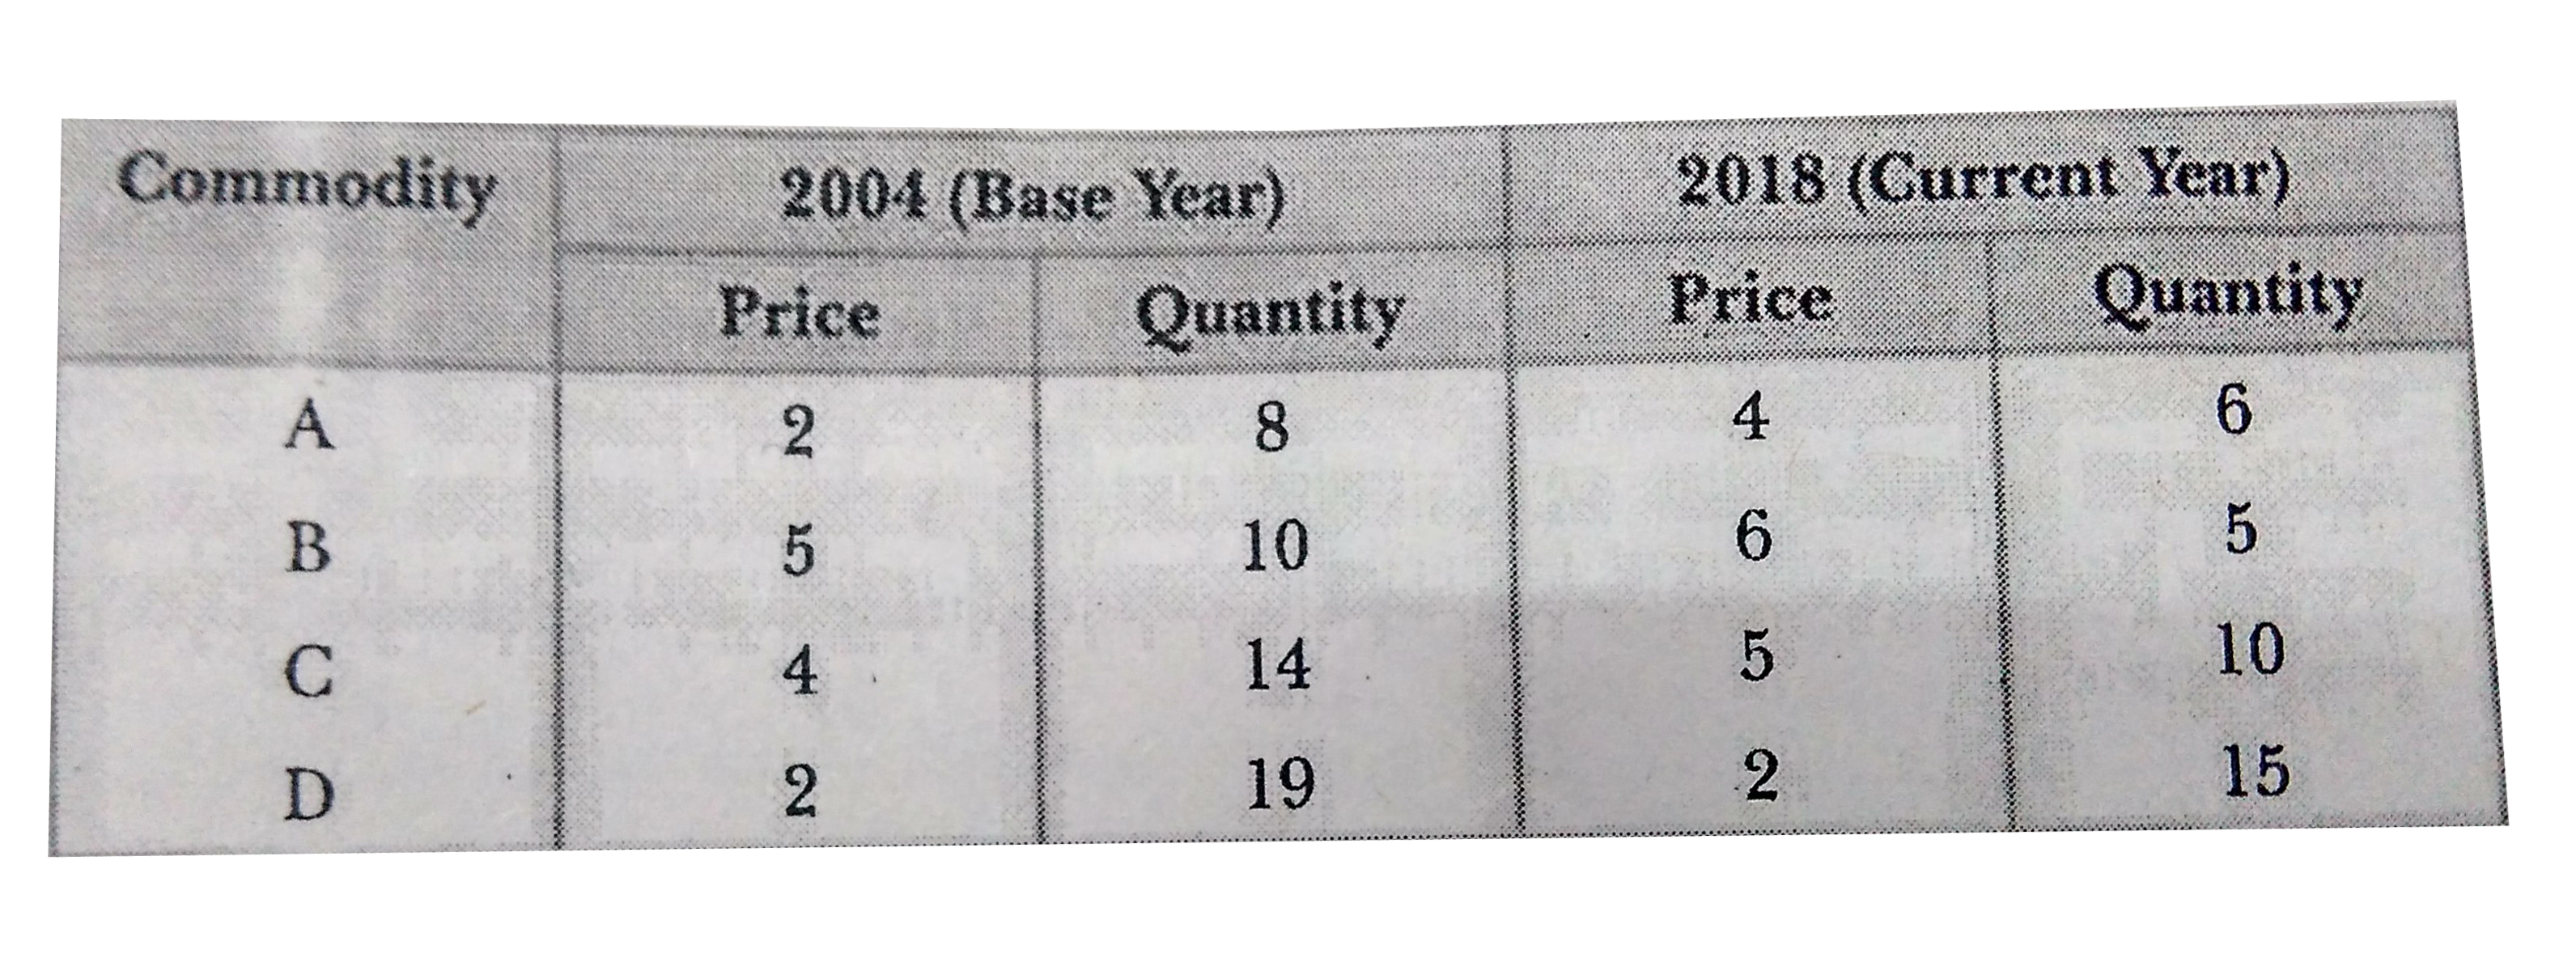 Construct index numbers of prices in the year 2018 from the following data by using: (i) Laspeyre's Method, (ii) Paasche's Method, and (iii) Fisher's Method.